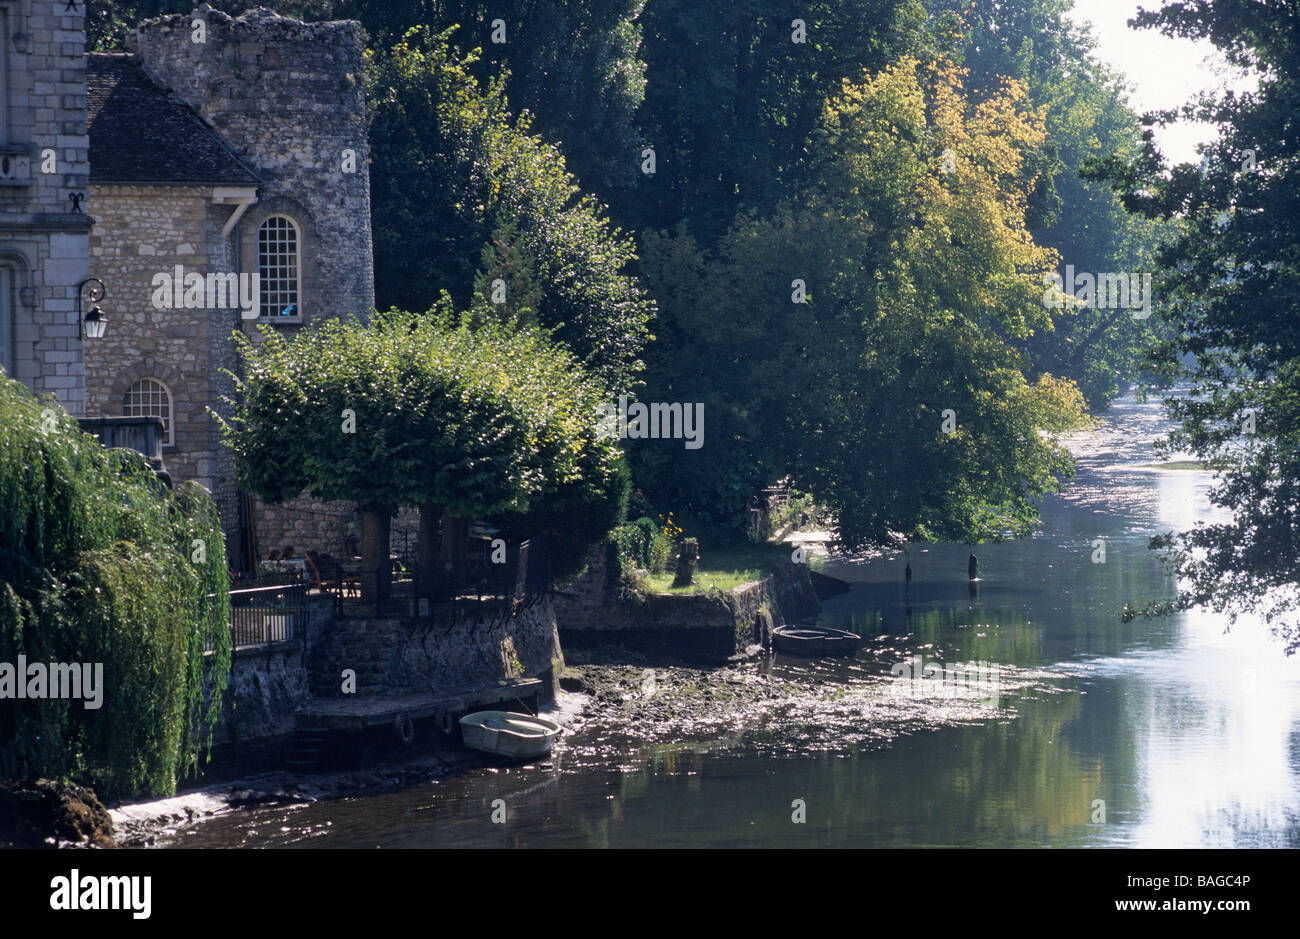 France, Seine et Marne, Moret sur Loing, banks of the River Loing, detailed picture of houses and mills Stock Photo